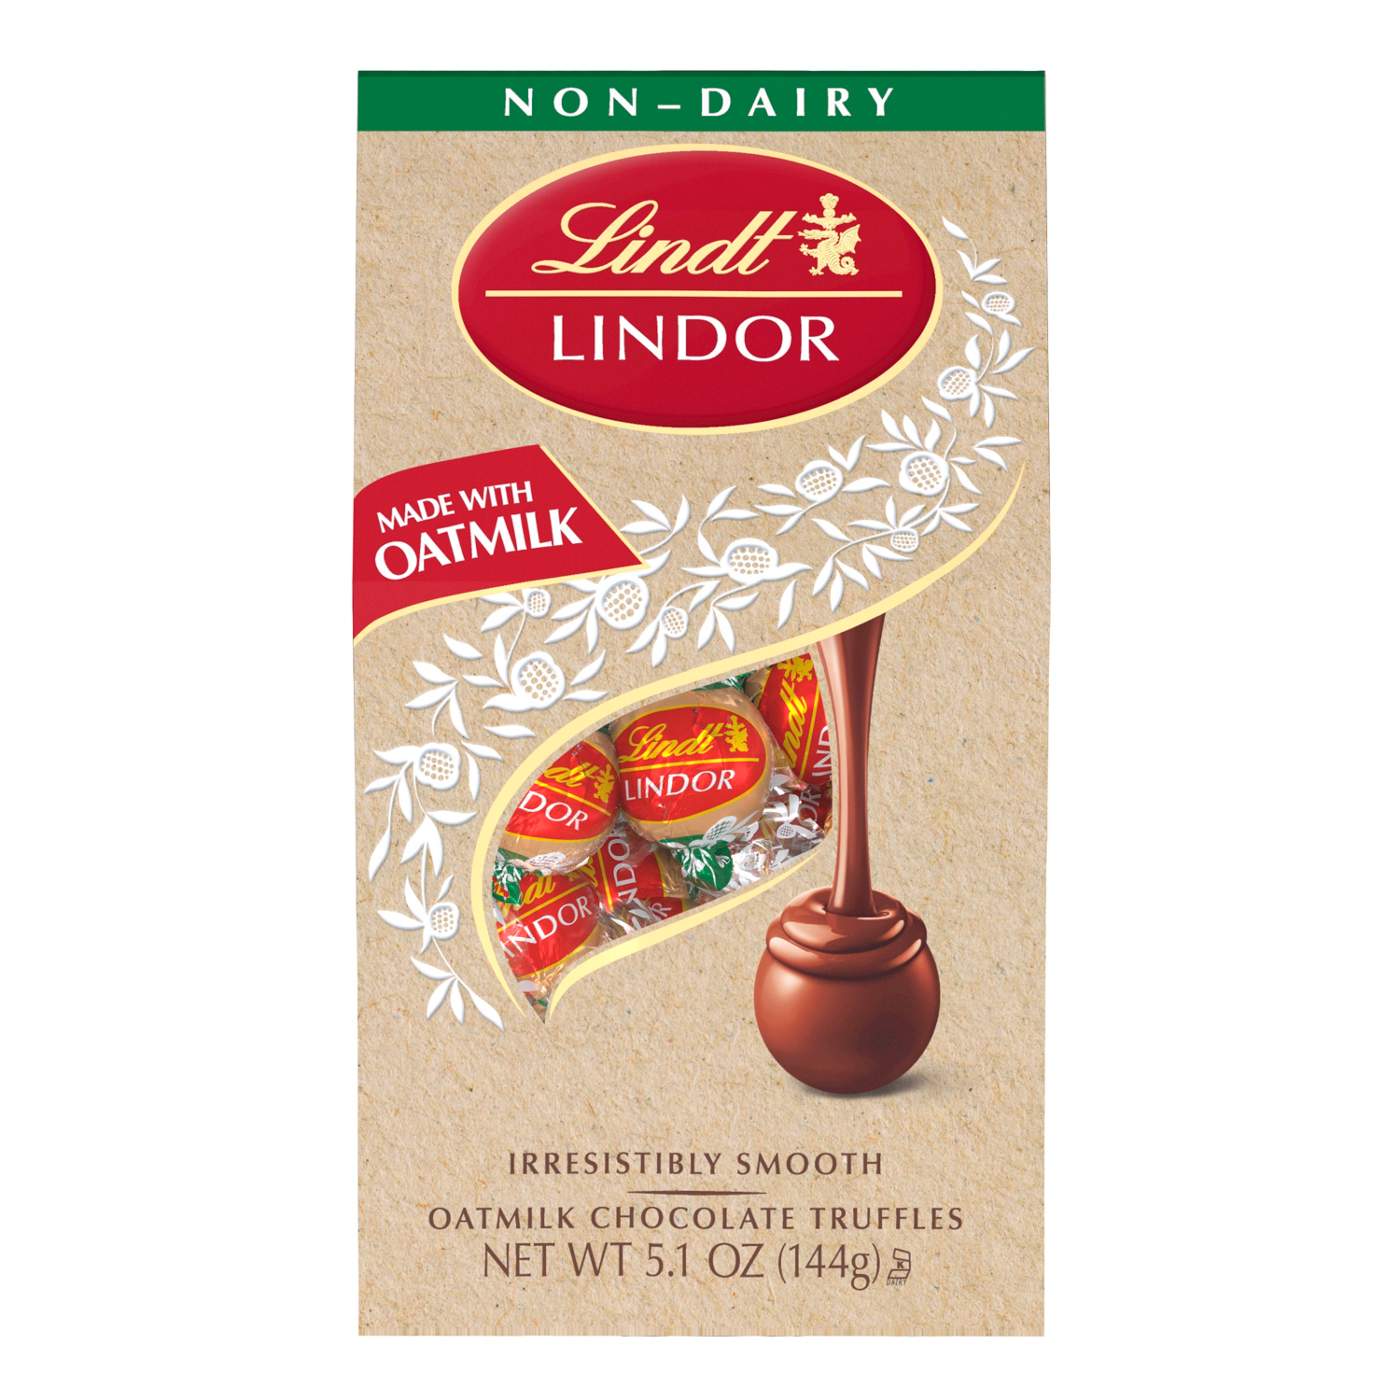 Lindt Lindor Non-Dairy Oatmilk Chocolate Truffles; image 1 of 2